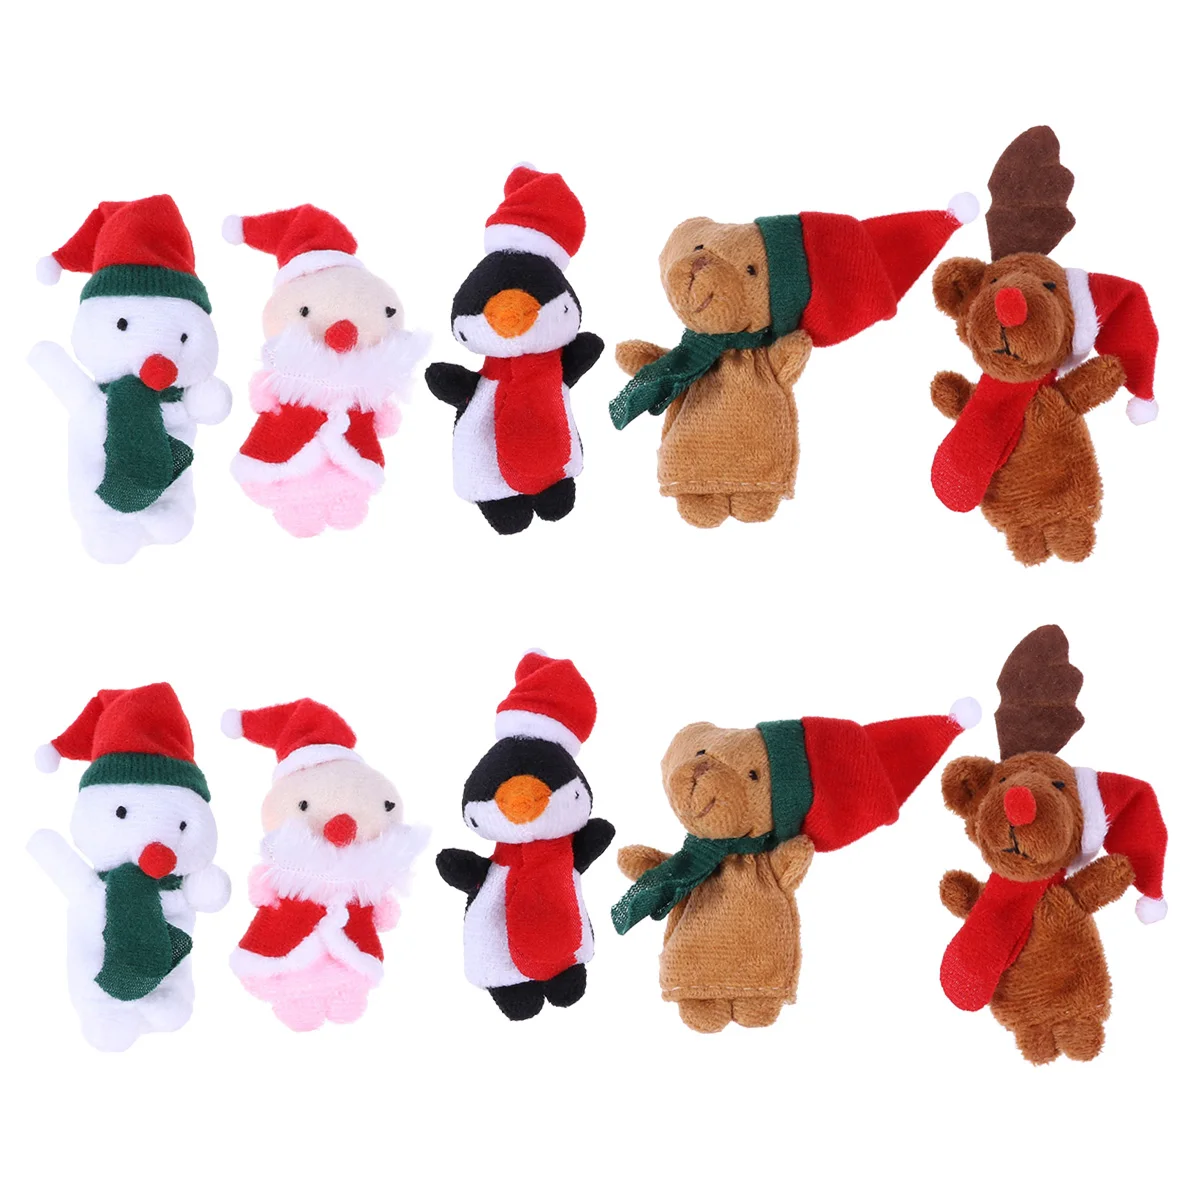 

Christmas Finger Puppets Toys: 10pcs Plush Santa Claus Snowman Reindeer Bear Dolls Xmas Hand for Holiday Goodie Bag Fillers